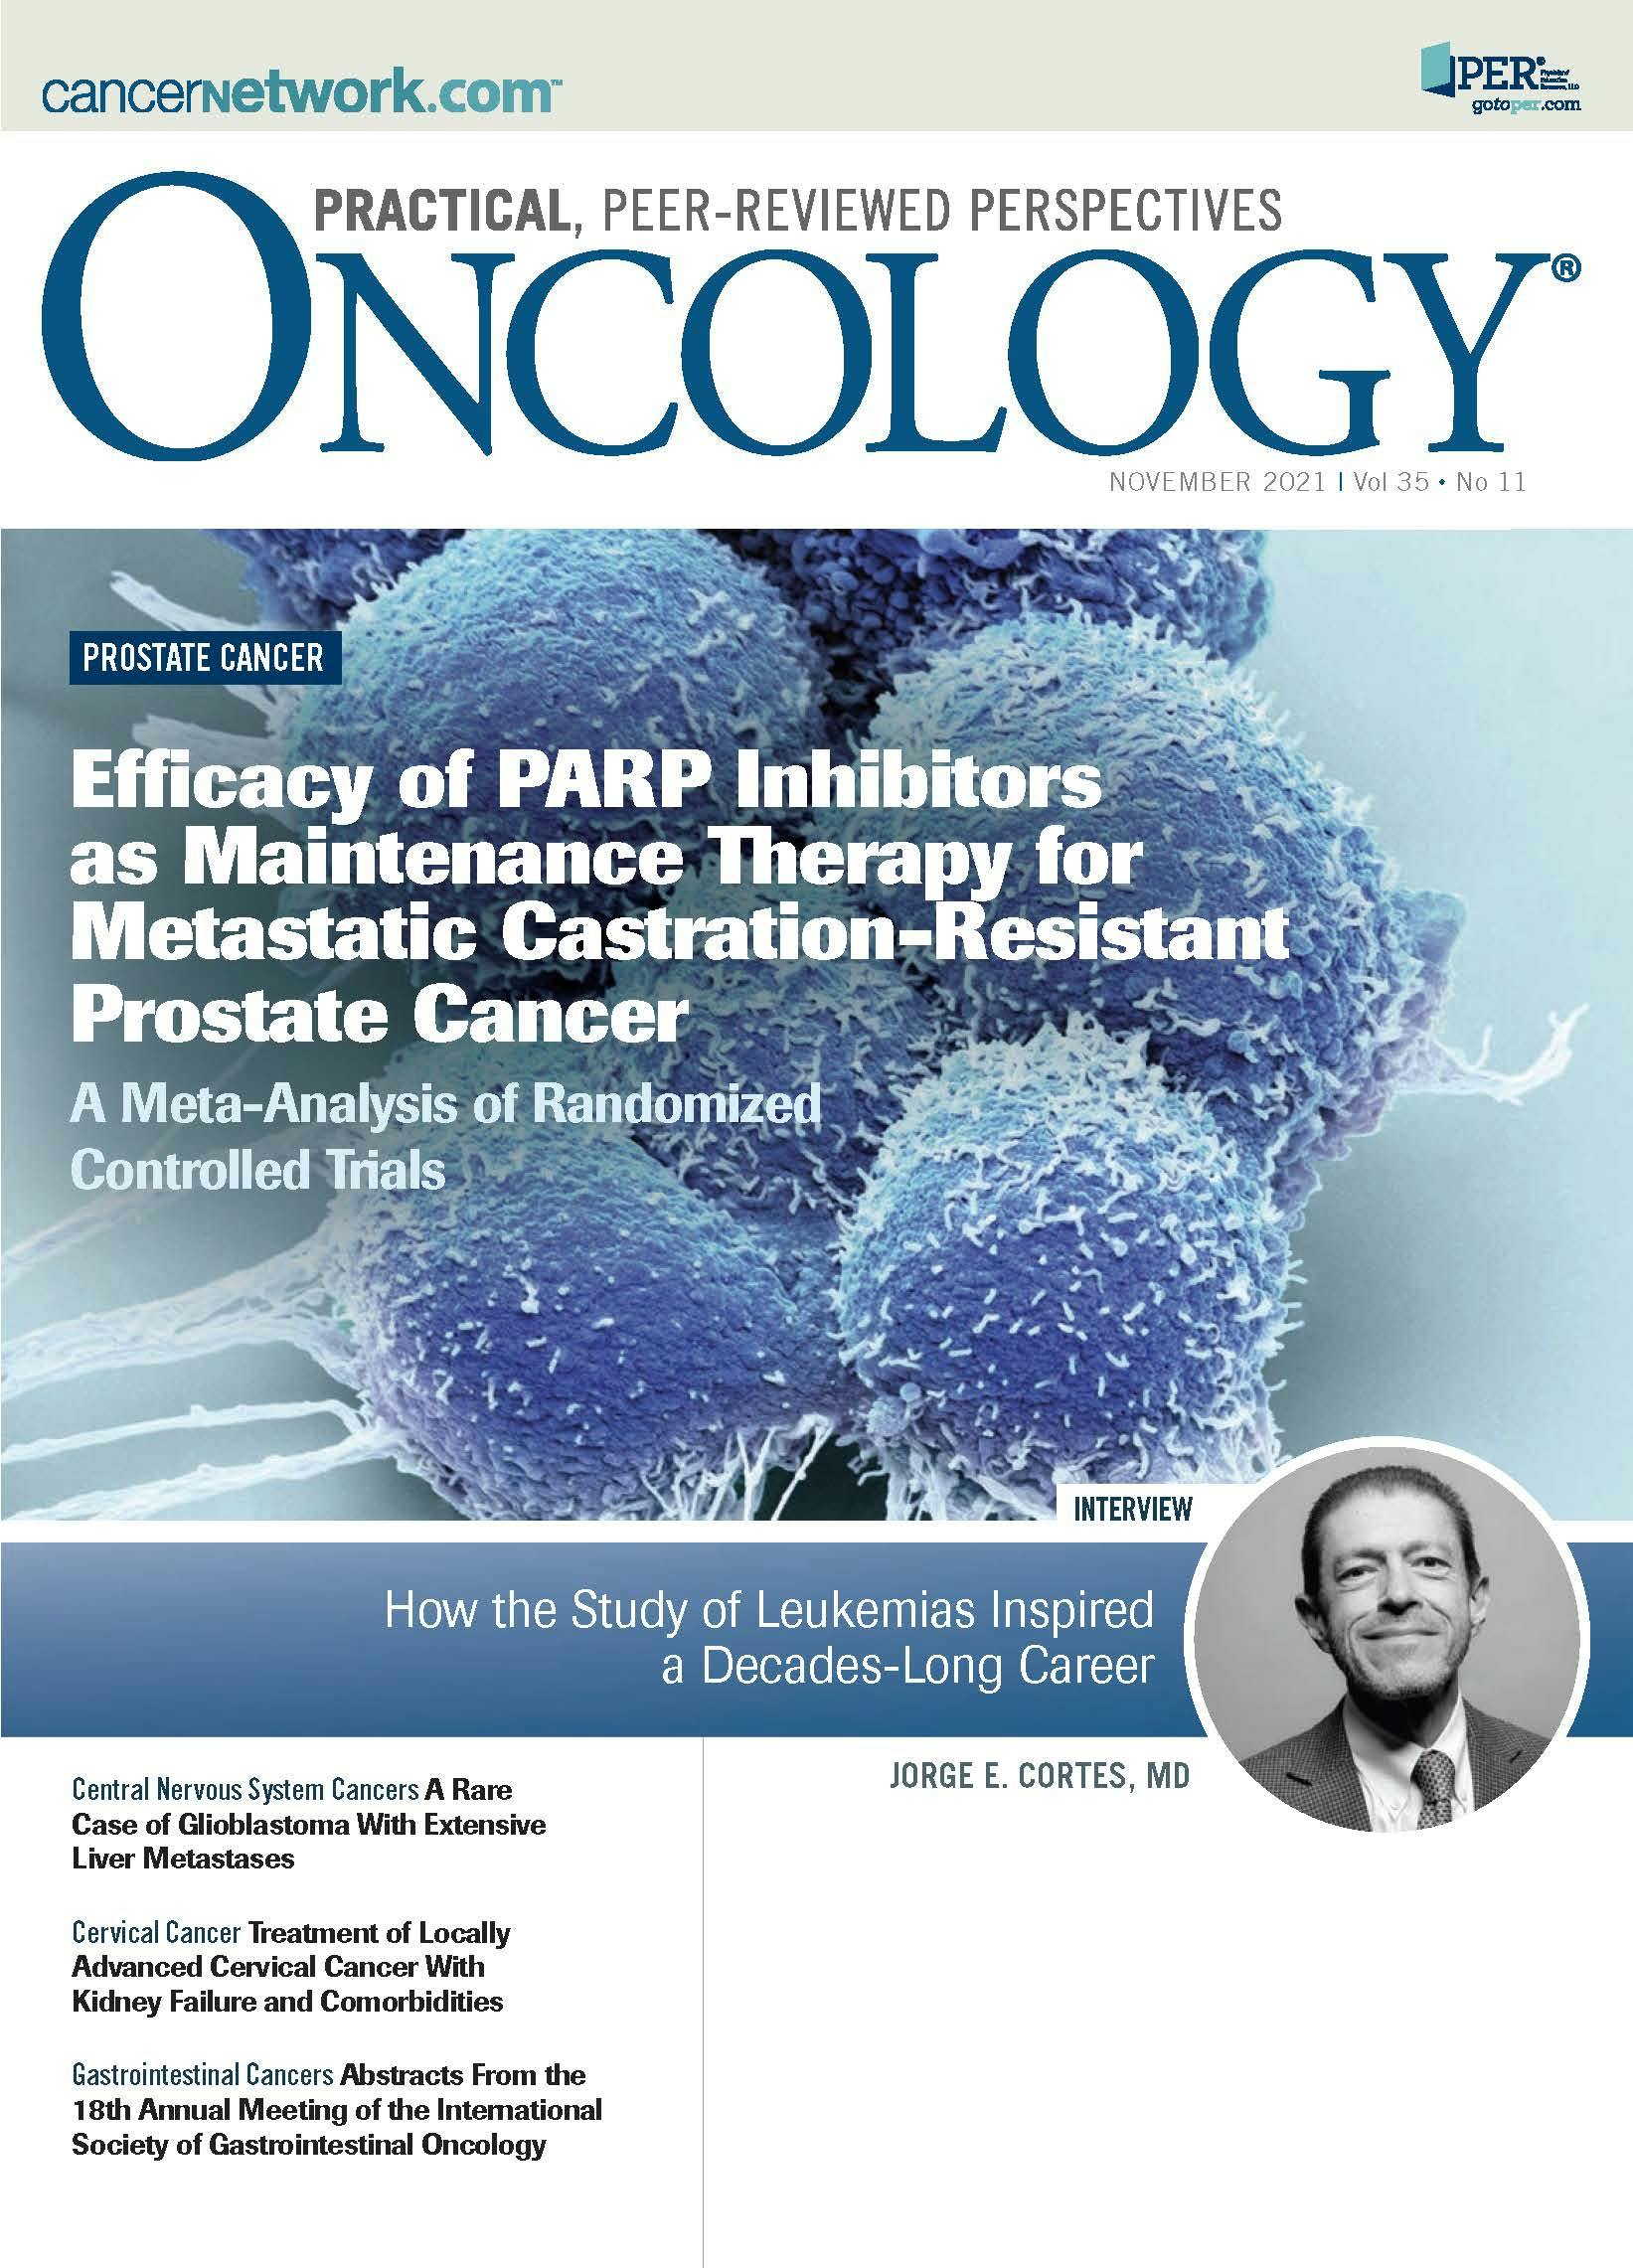 ONCOLOGY Vol 35, Issue 11